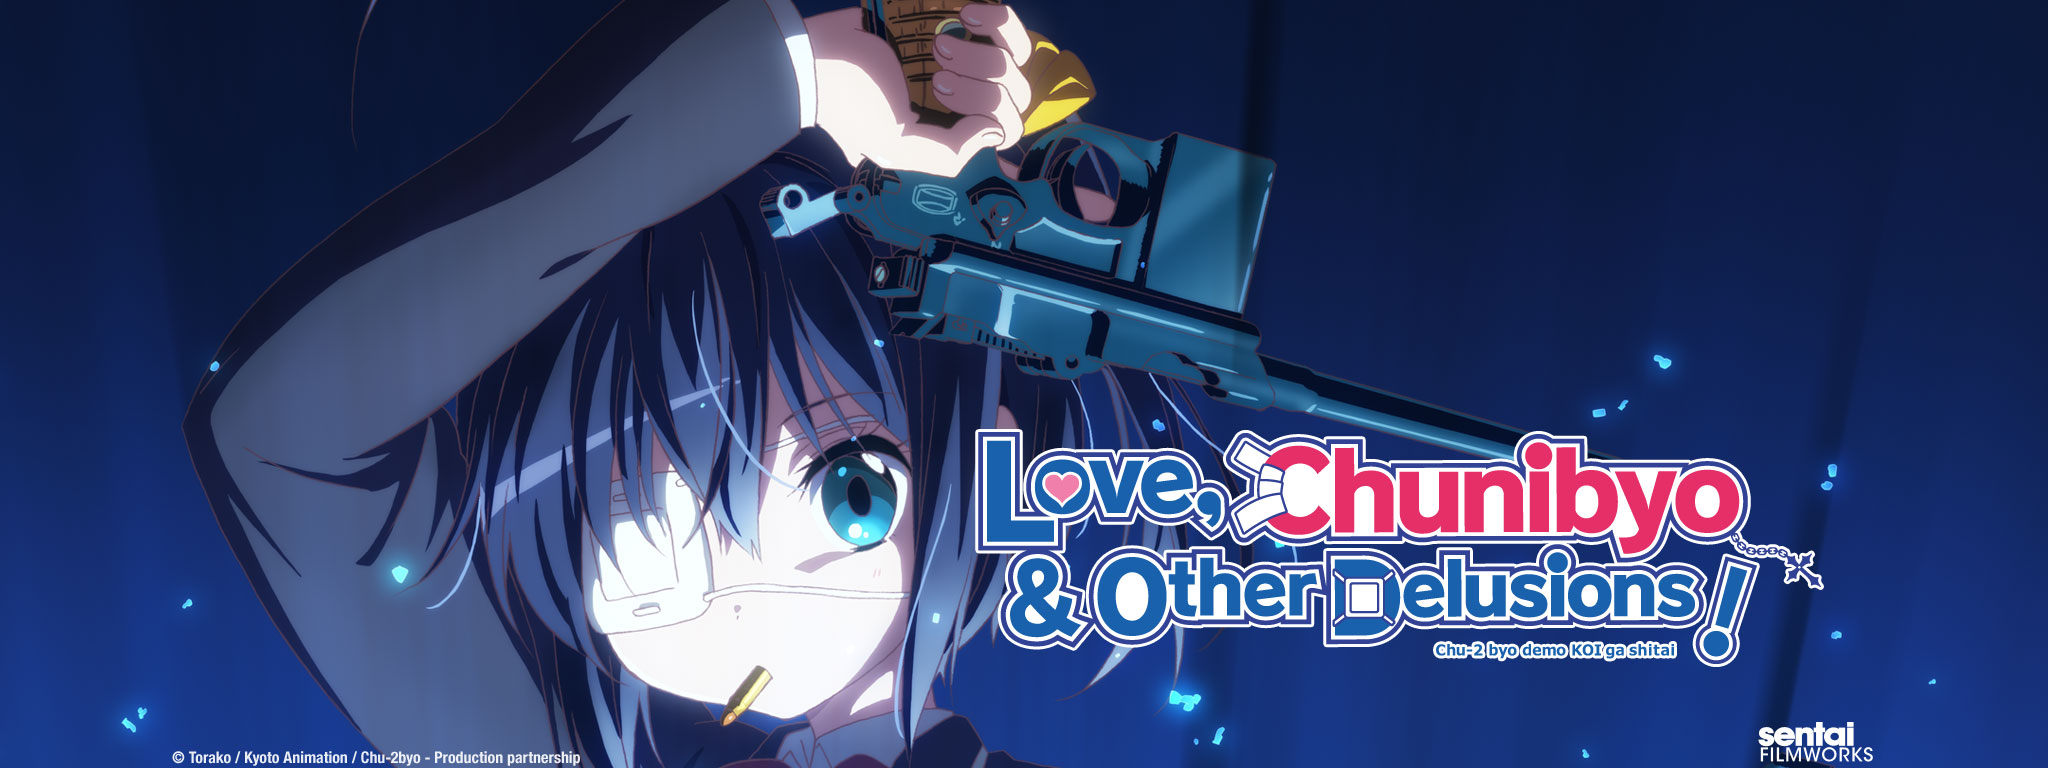 Title Art for Love, Chunibyo & Other Delusions!